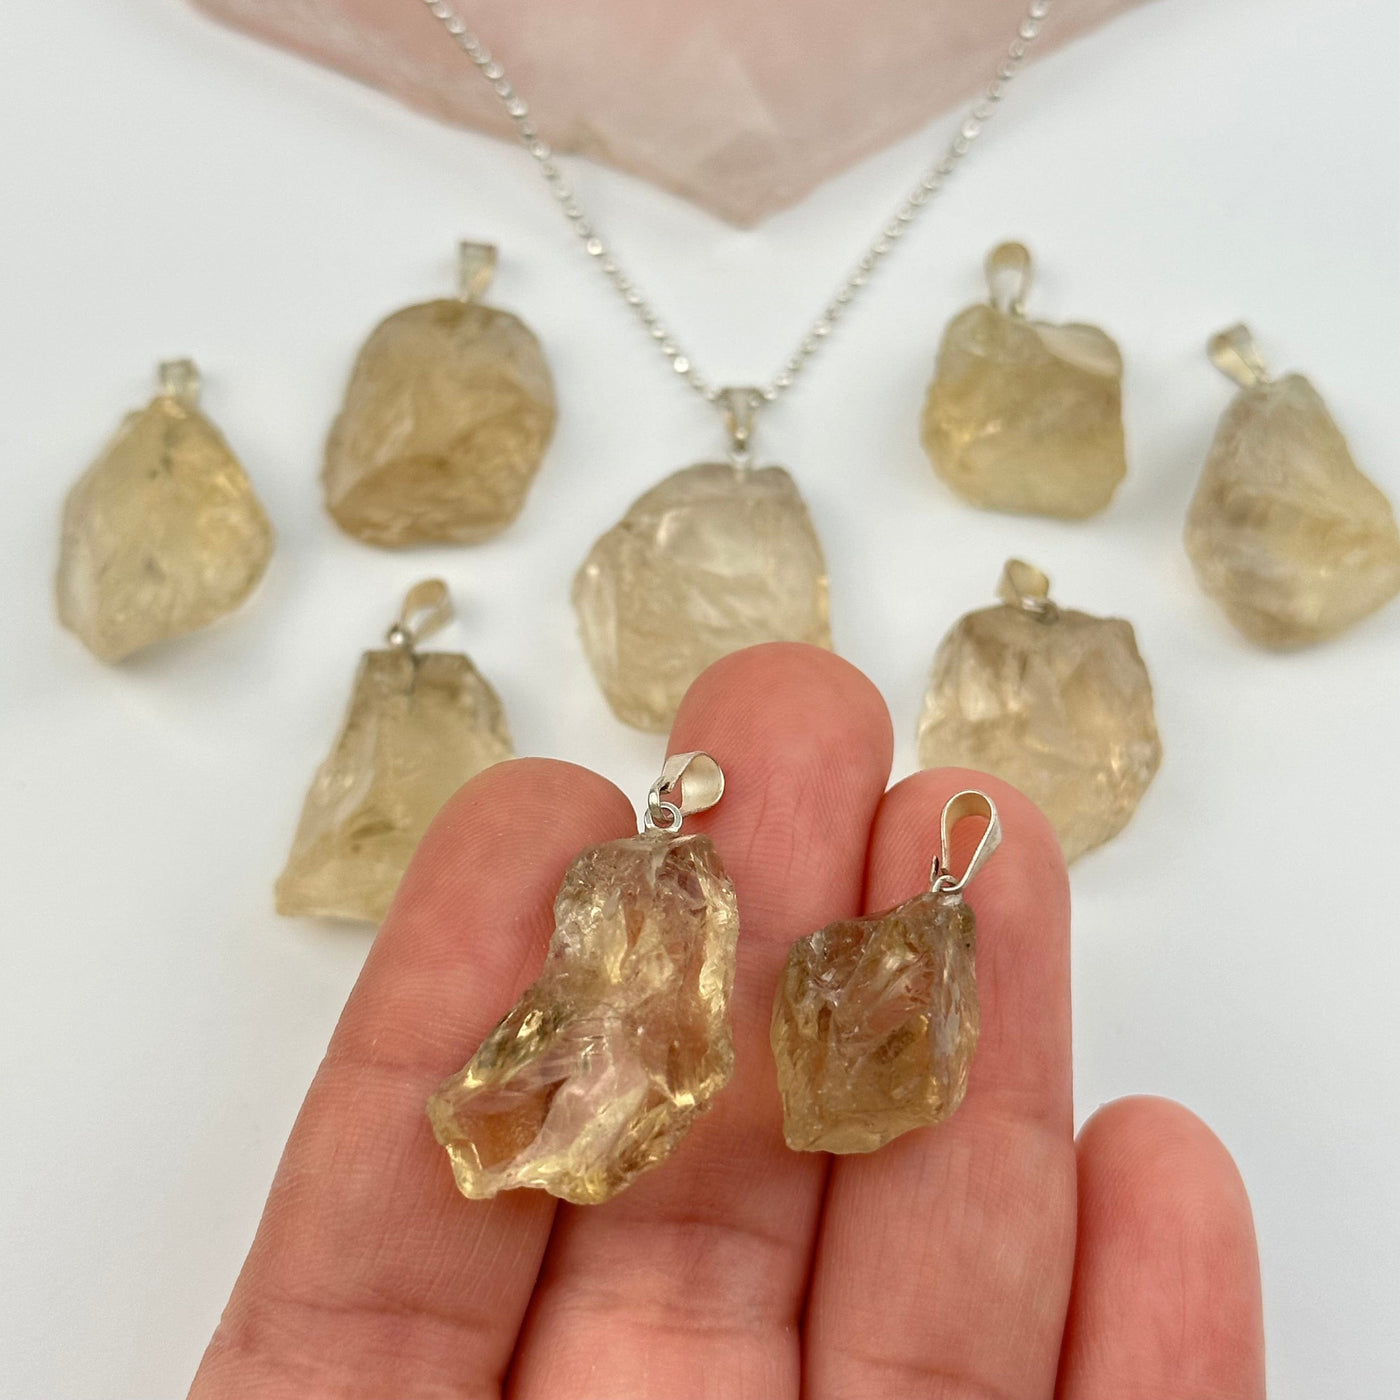 Rough Natural Crystal Stone Pendant - citrine - in hand for size reference